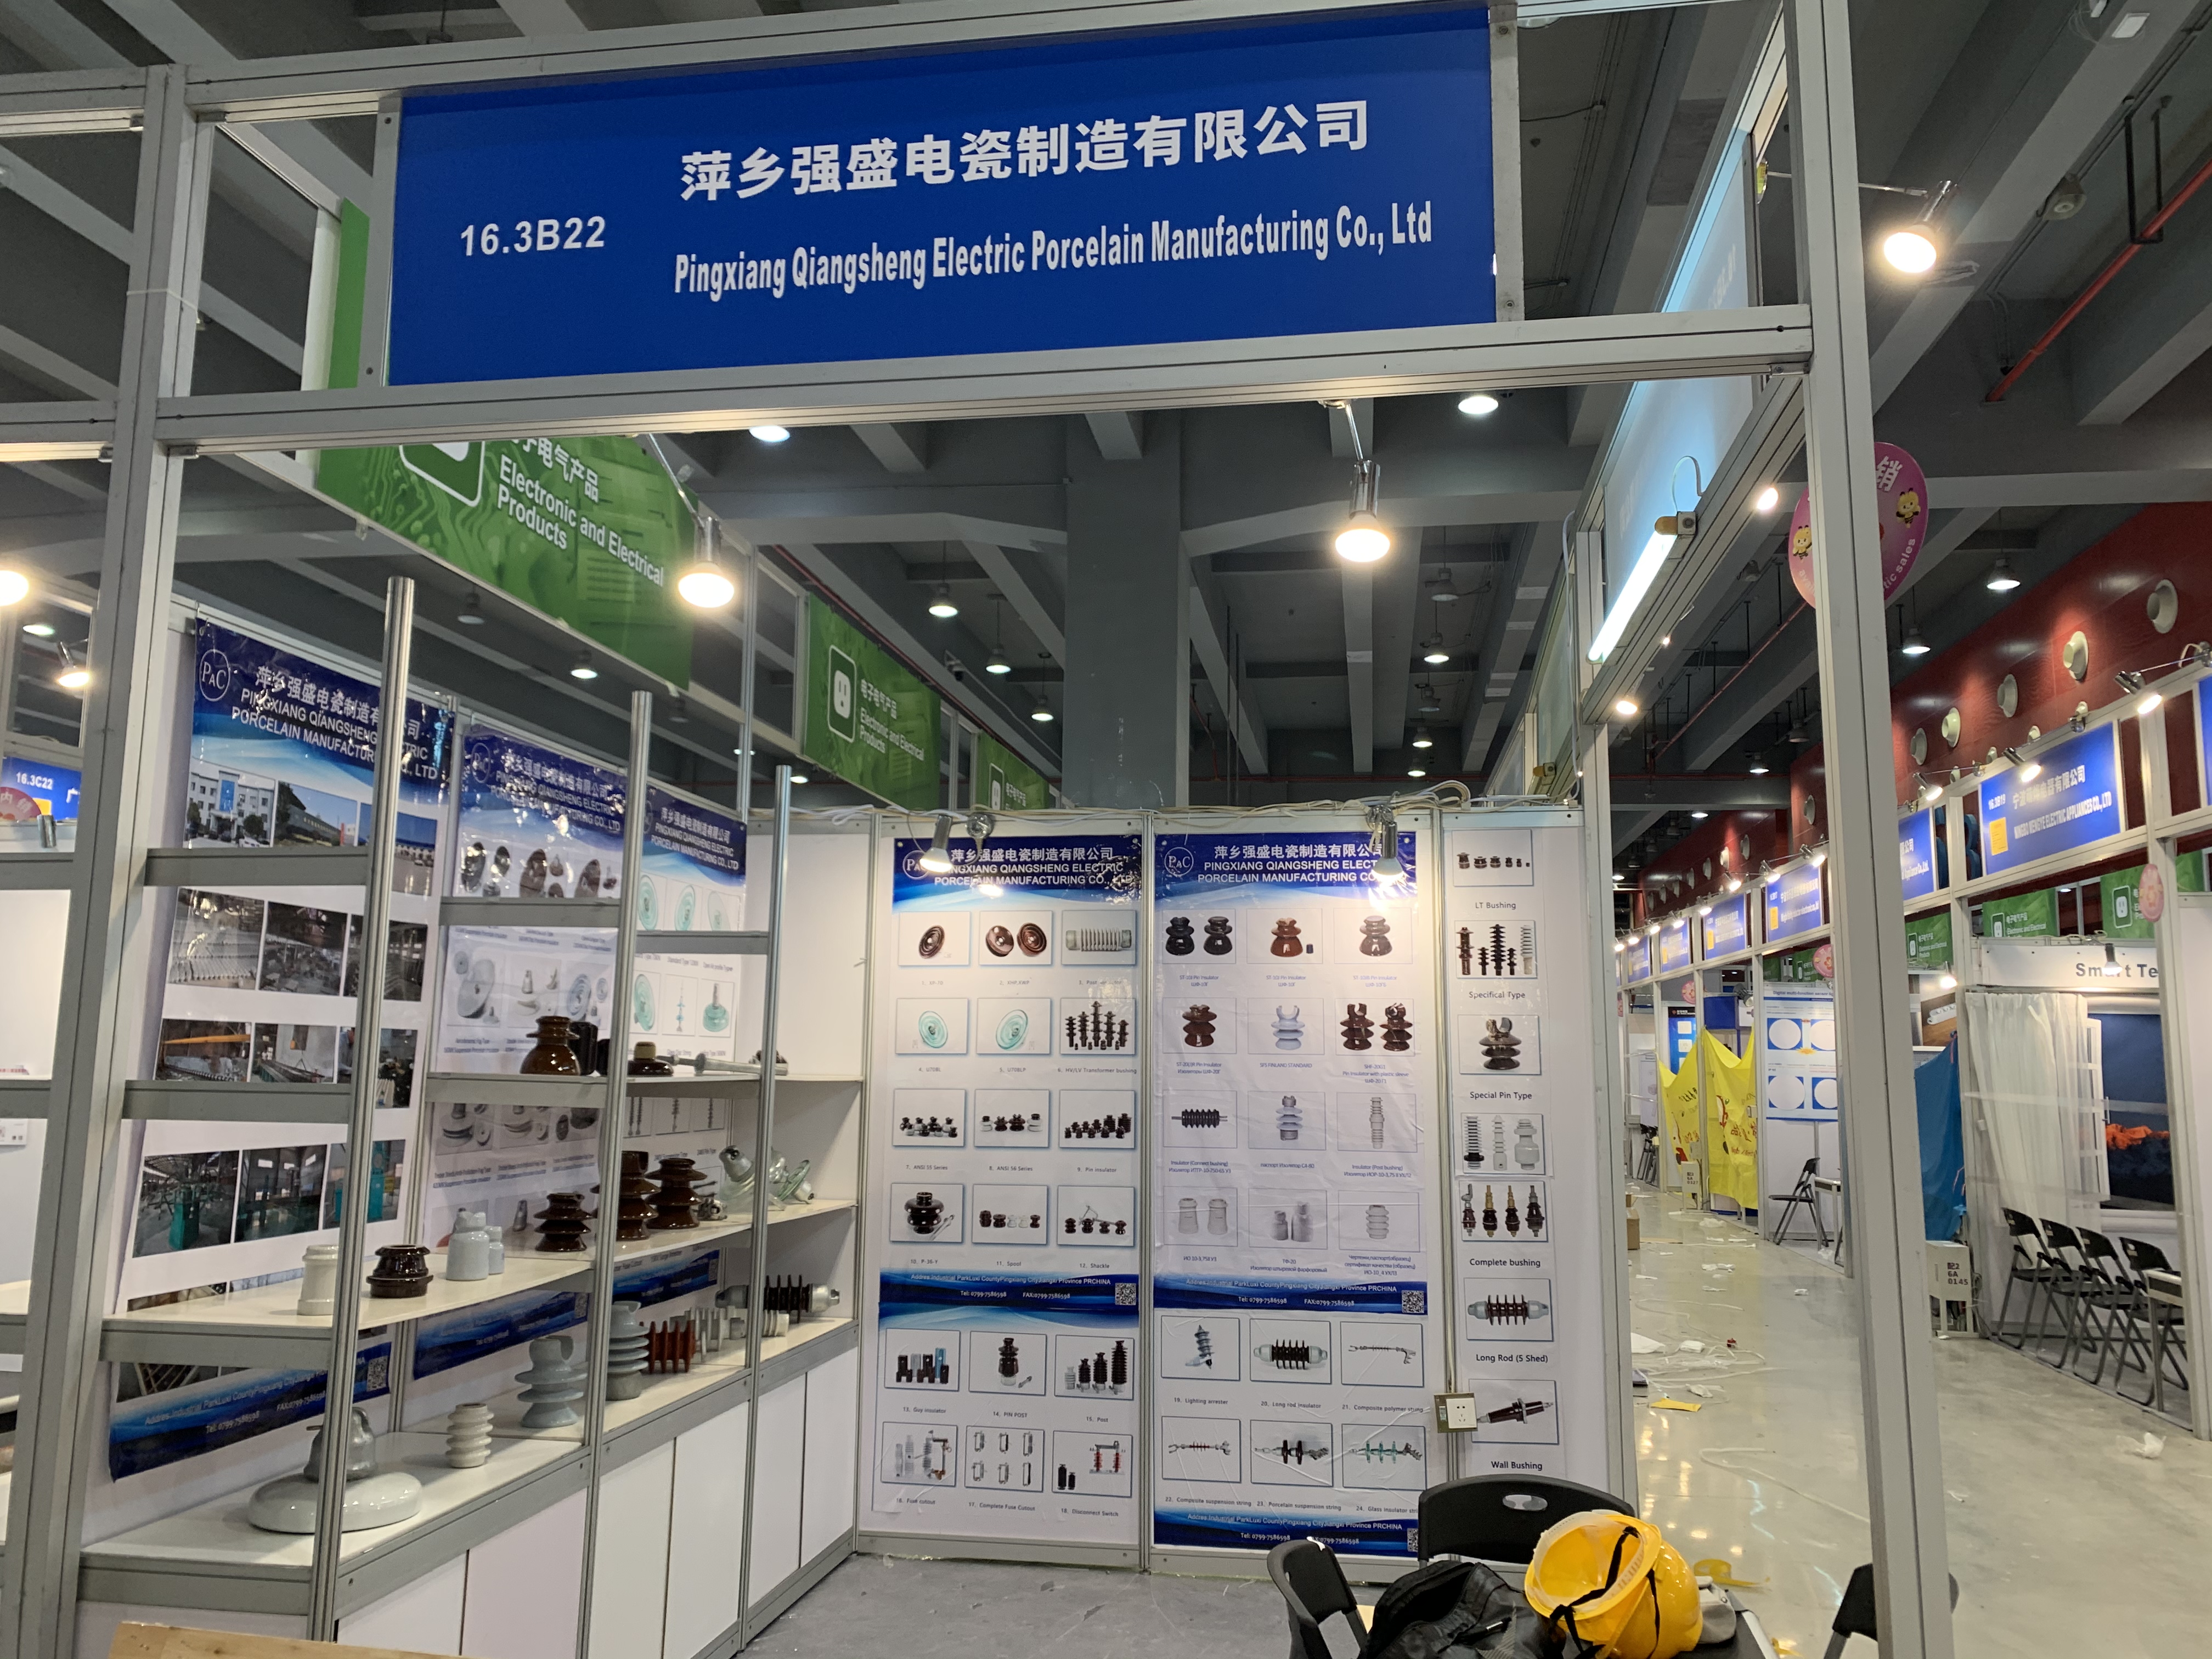 Johnson Electric/Qiangsheng Electric Porcelain has completed the layout of the Canton Fair